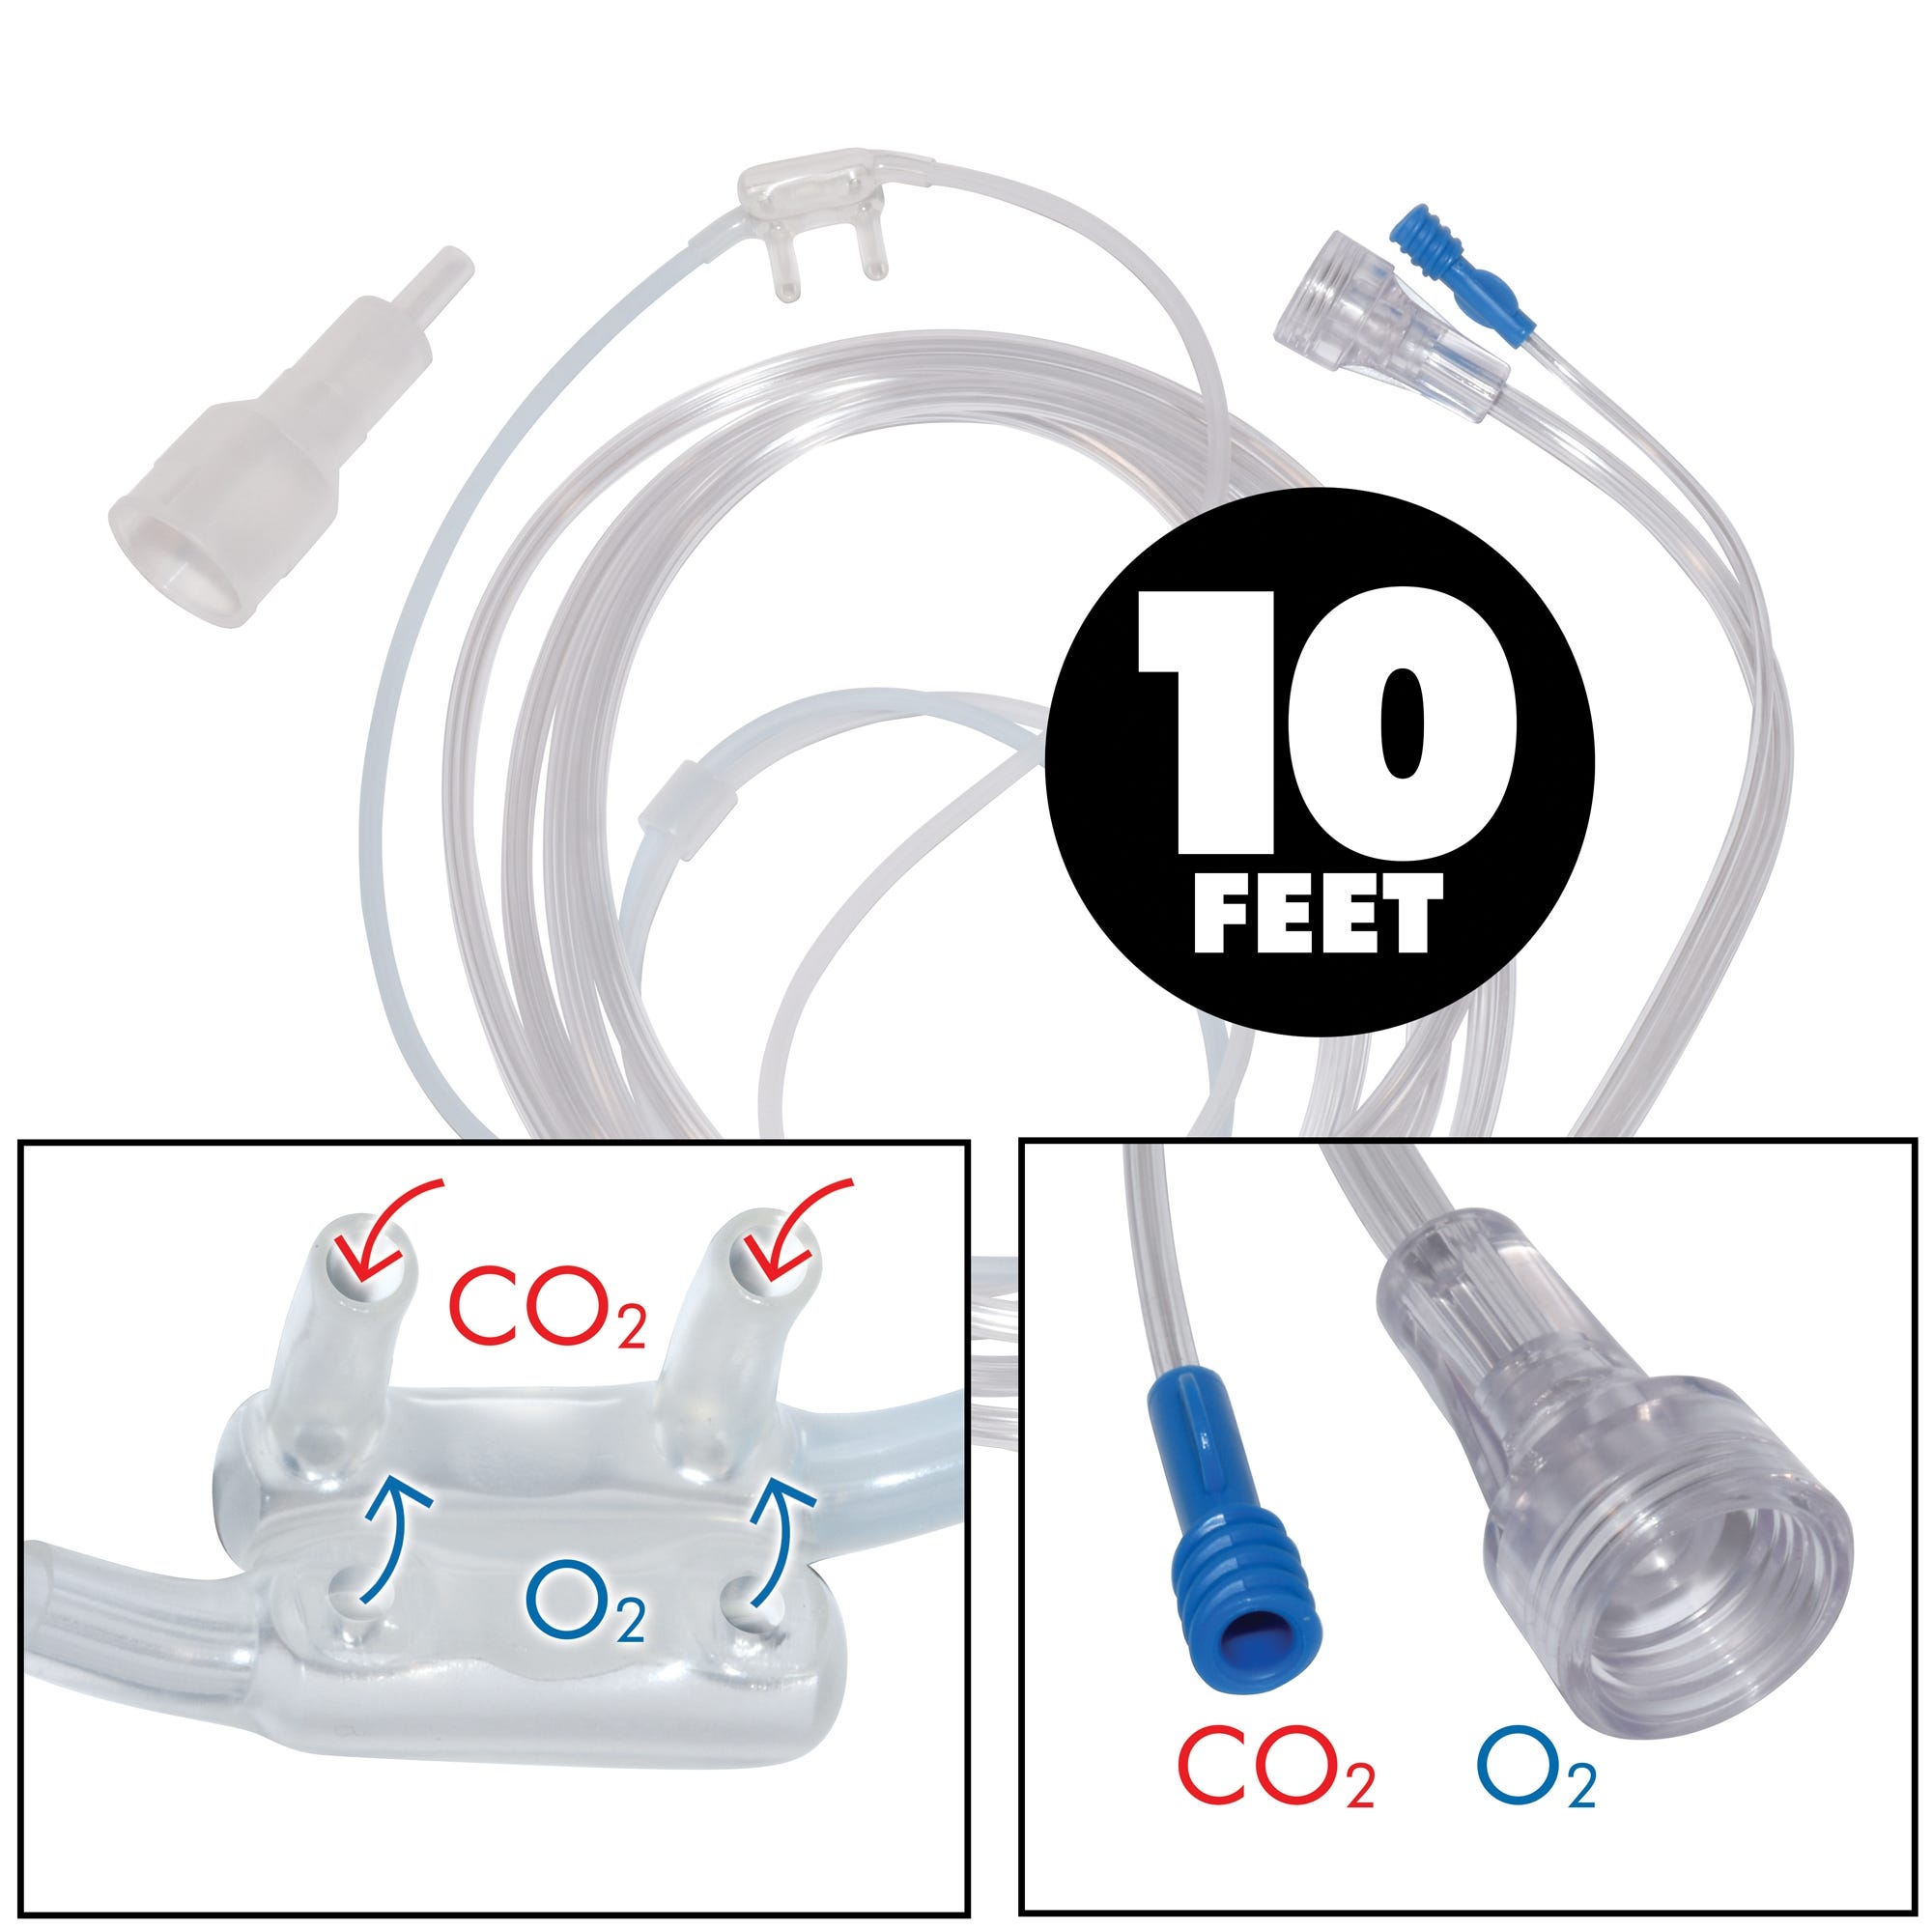 FLEXICARE DUAL CO2/02 NASAL CANNULA-Adult with female luer, 10 ft. -25/Box